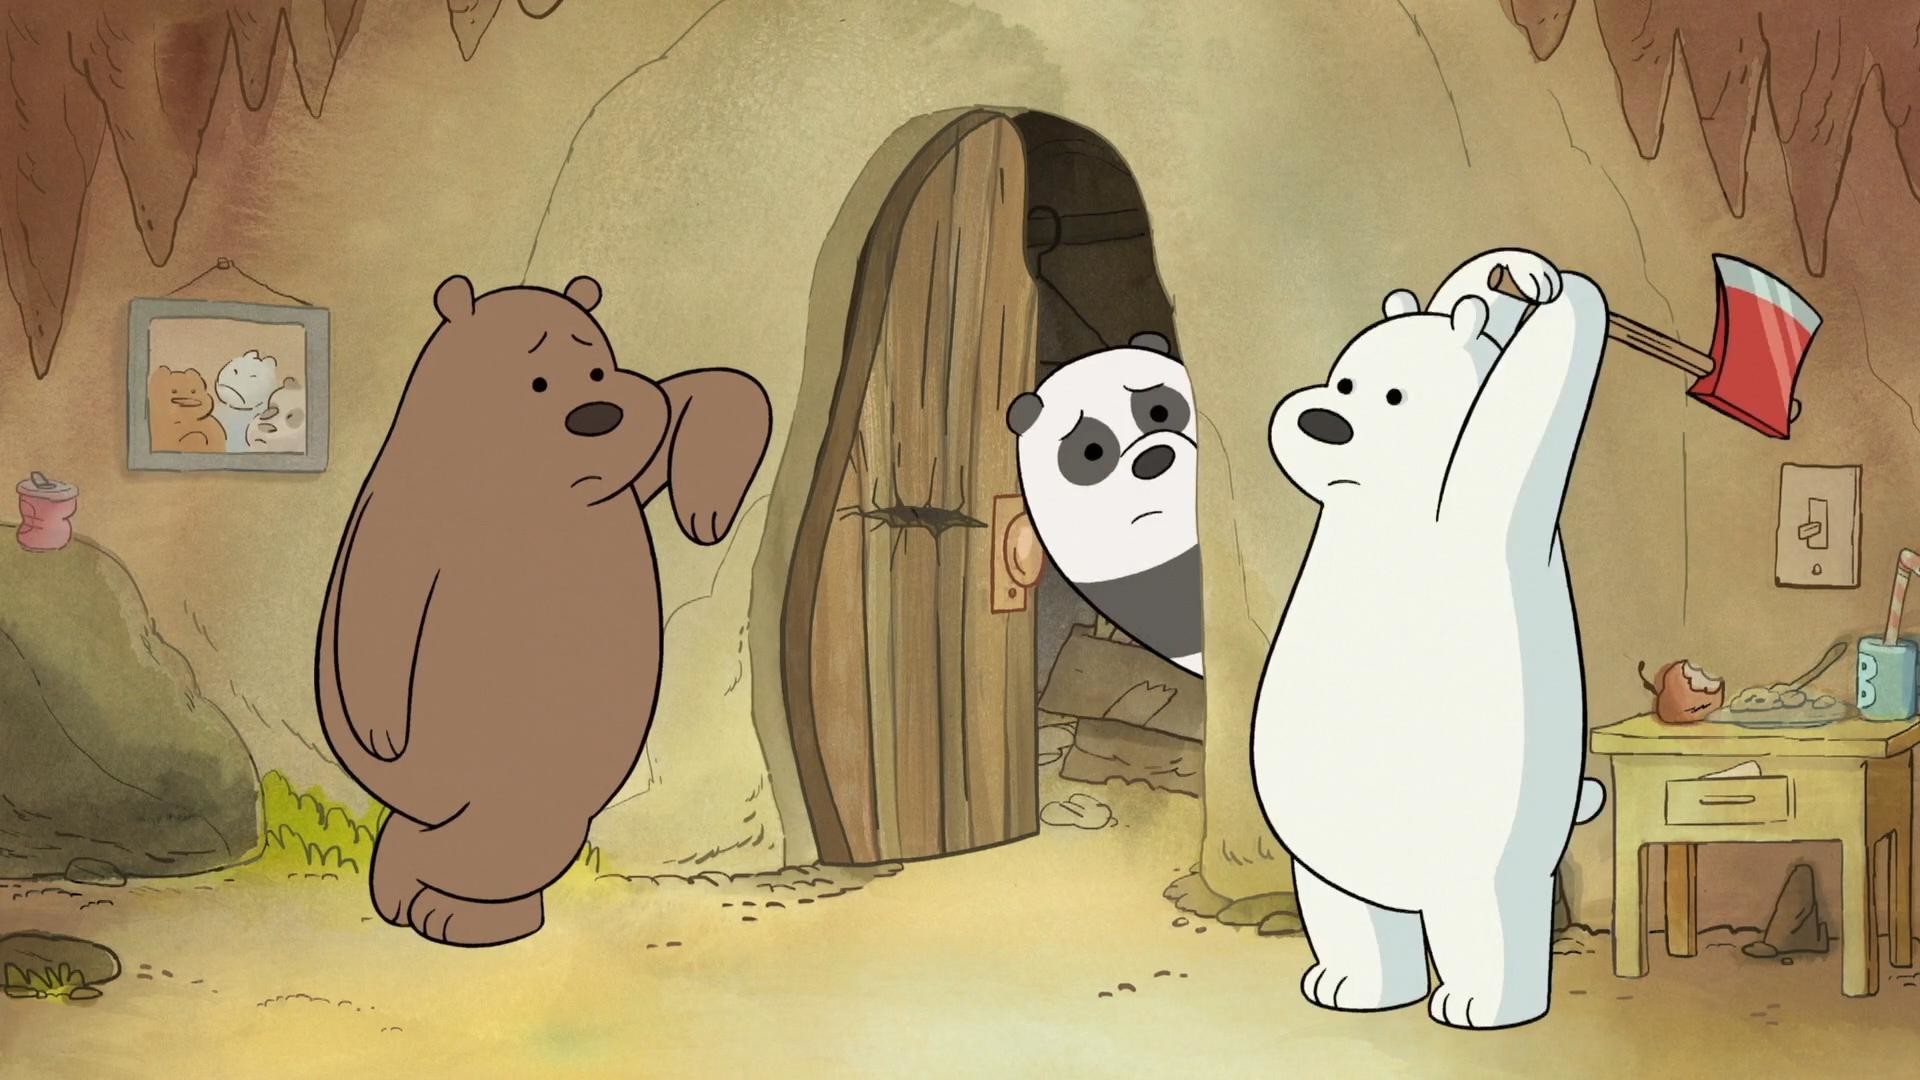 We Bare Bears was conceived as part of Cartoon Network Studios thriving and prolific shorts development program which also created the networks latest hit